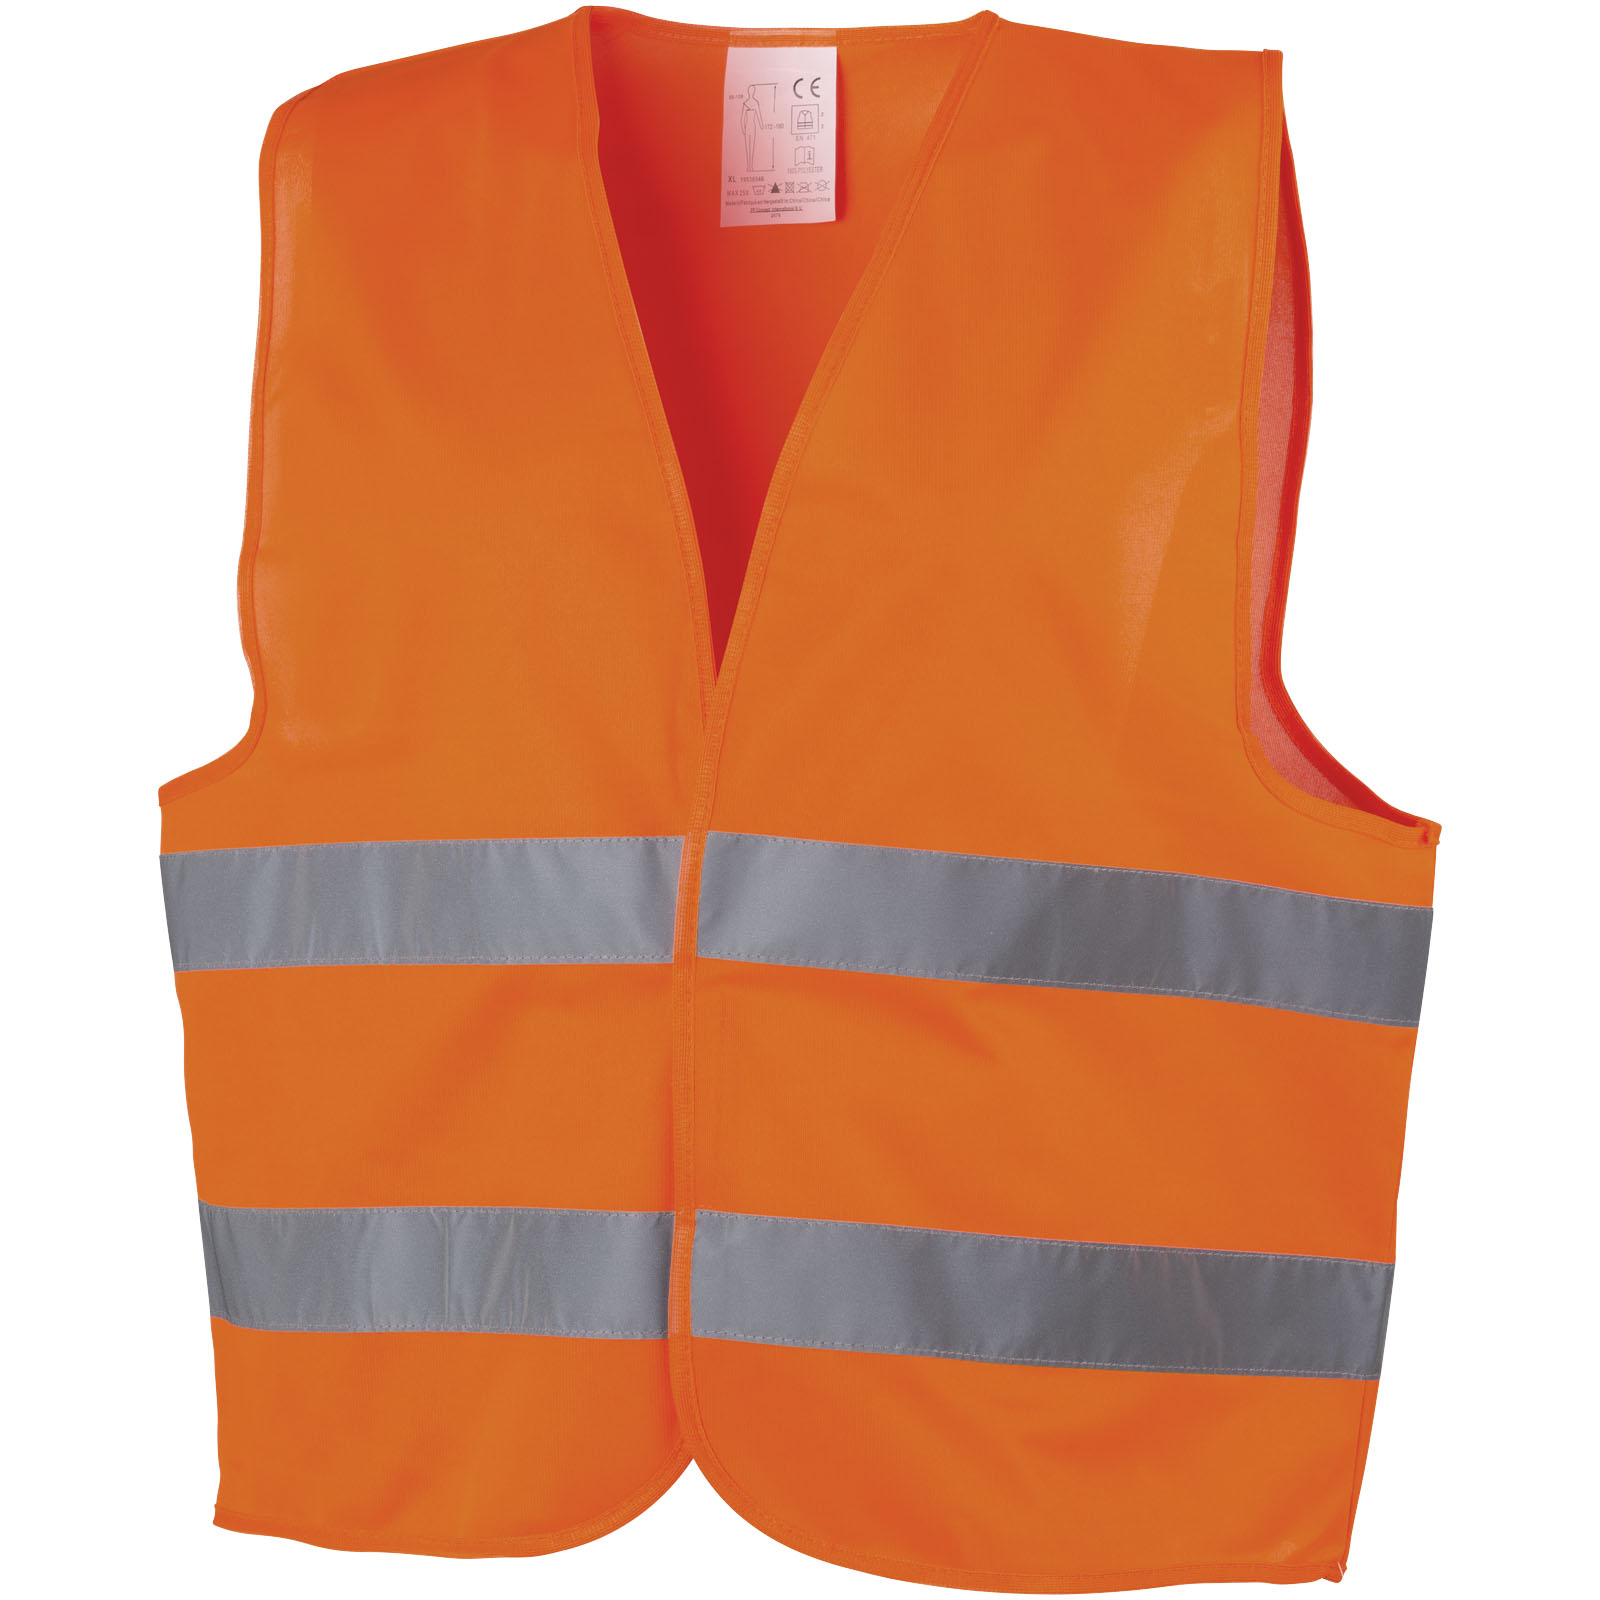 Advertising Safety Vests - RFX™ See-me XL safety vest for professional use